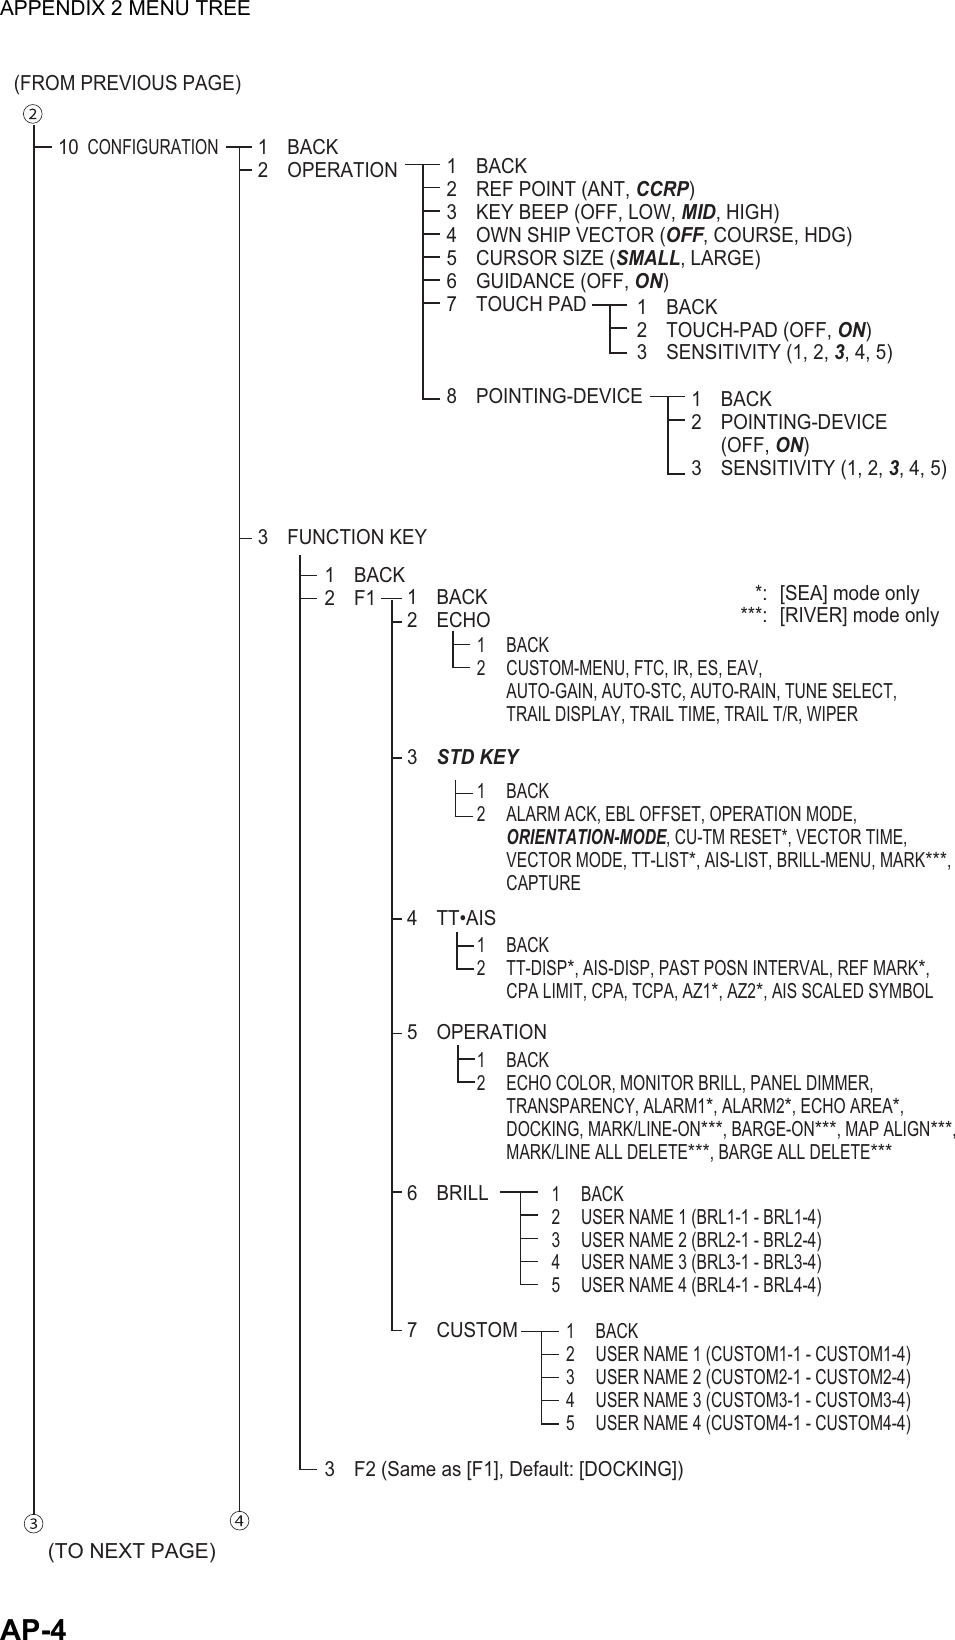 APPENDIX 2 MENU TREEAP-410 CONFIGURATION(FROM PREVIOUS PAGE)1 BACK2 OPERATION3 FUNCTION KEY1 BACK2  REF POINT (ANT, CCRP)3  KEY BEEP (OFF, LOW, MID, HIGH)4  OWN SHIP VECTOR (OFF, COURSE, HDG)5 CURSOR SIZE (SMALL, LARGE)6 GUIDANCE (OFF, ON)7 TOUCH PAD8 POINTING-DEVICE1 BACK2 TOUCH-PAD (OFF, ON)3 SENSITIVITY (1, 2, 3, 4, 5) 1 BACK2 POINTING-DEVICE(OFF, ON)3 SENSITIVITY (1, 2, 3, 4, 5)1 BACK2 F13  F2 (Same as [F1], Default: [DOCKING])1 BACK2 ECHO3  STD KEY4 TT•AIS5 OPERATION6 BRILL7 CUSTOM1 BACK2  CUSTOM-MENU, FTC, IR, ES, EAV,  AUTO-GAIN, AUTO-STC, AUTO-RAIN, TUNE SELECT, TRAIL DISPLAY, TRAIL TIME, TRAIL T/R, WIPER1 BACK2  ALARM ACK, EBL OFFSET, OPERATION MODE, ORIENTATION-MODE, CU-TM RESET*, VECTOR TIME, VECTOR MODE, TT-LIST*, AIS-LIST, BRILL-MENU, MARK***, CAPTURE1 BACK2 TT-DISP*, AIS-DISP, PAST POSN INTERVAL, REF MARK*, CPA LIMIT, CPA, TCPA, AZ1*, AZ2*, AIS SCALED SYMBOL1 BACK2  ECHO COLOR, MONITOR BRILL, PANEL DIMMER, TRANSPARENCY, ALARM1*, ALARM2*, ECHO AREA*, DOCKING, MARK/LINE-ON***, BARGE-ON***, MAP ALIGN***, MARK/LINE ALL DELETE***, BARGE ALL DELETE***1 BACK2  USER NAME 1 (BRL1-1 - BRL1-4)3  USER NAME 2 (BRL2-1 - BRL2-4)4  USER NAME 3 (BRL3-1 - BRL3-4)5  USER NAME 4 (BRL4-1 - BRL4-4)1 BACK2  USER NAME 1 (CUSTOM1-1 - CUSTOM1-4)3  USER NAME 2 (CUSTOM2-1 - CUSTOM2-4)4  USER NAME 3 (CUSTOM3-1 - CUSTOM3-4)5  USER NAME 4 (CUSTOM4-1 - CUSTOM4-4)(TO NEXT PAGE)  *:  [SEA] mode only ***:  [RIVER] mode only